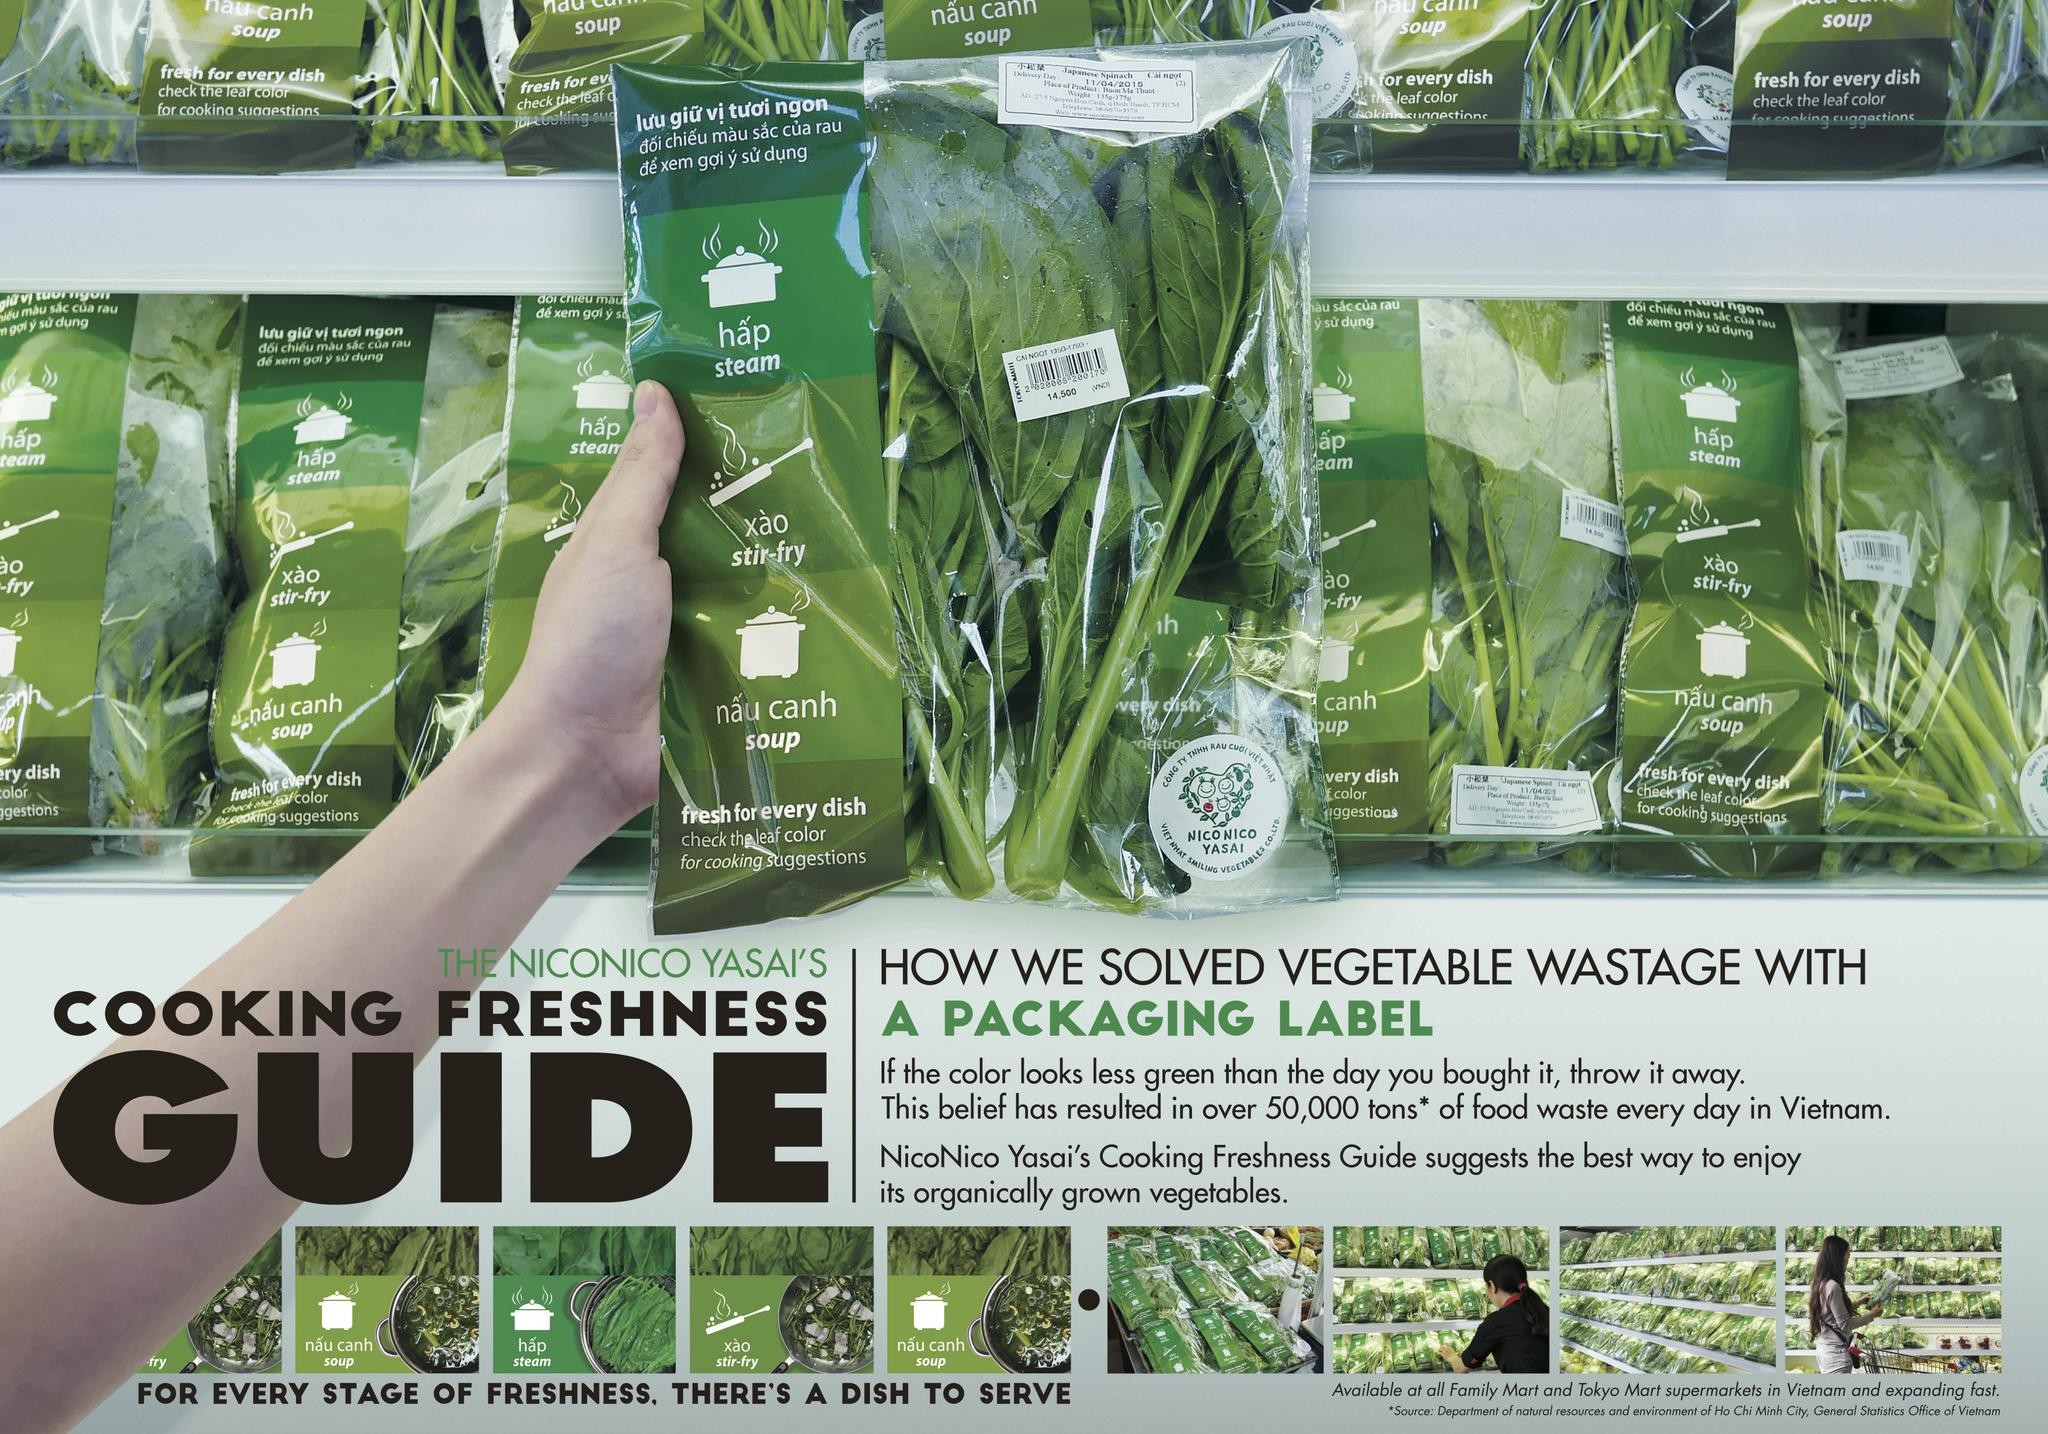 COOKING FRESHNESS GUIDE